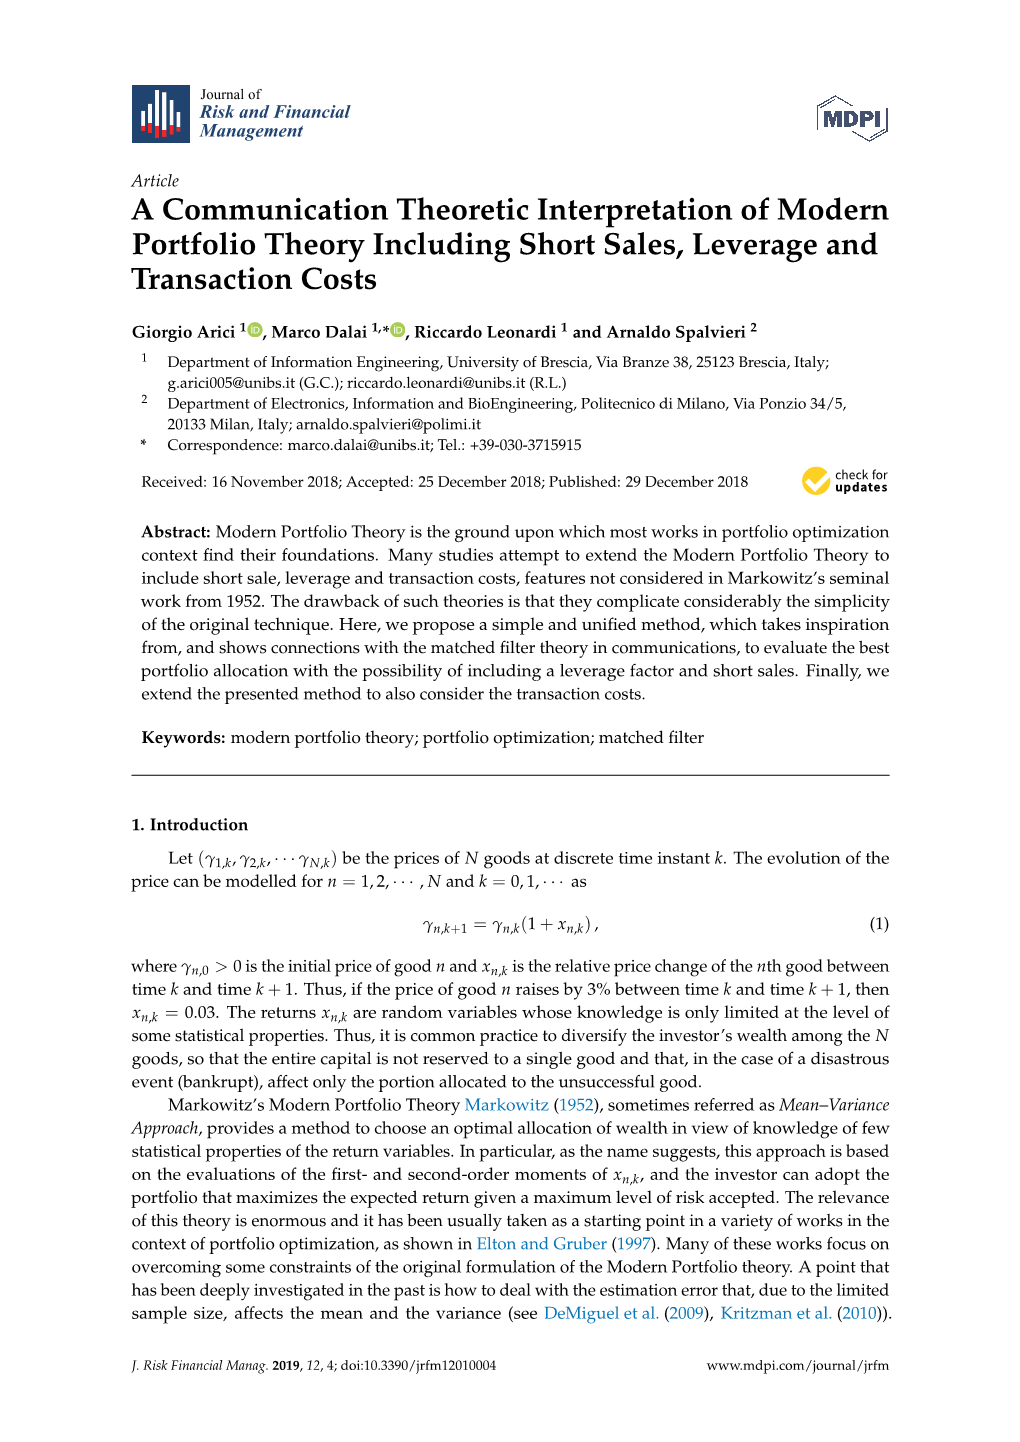 A Communication Theoretic Interpretation of Modern Portfolio Theory Including Short Sales, Leverage and Transaction Costs